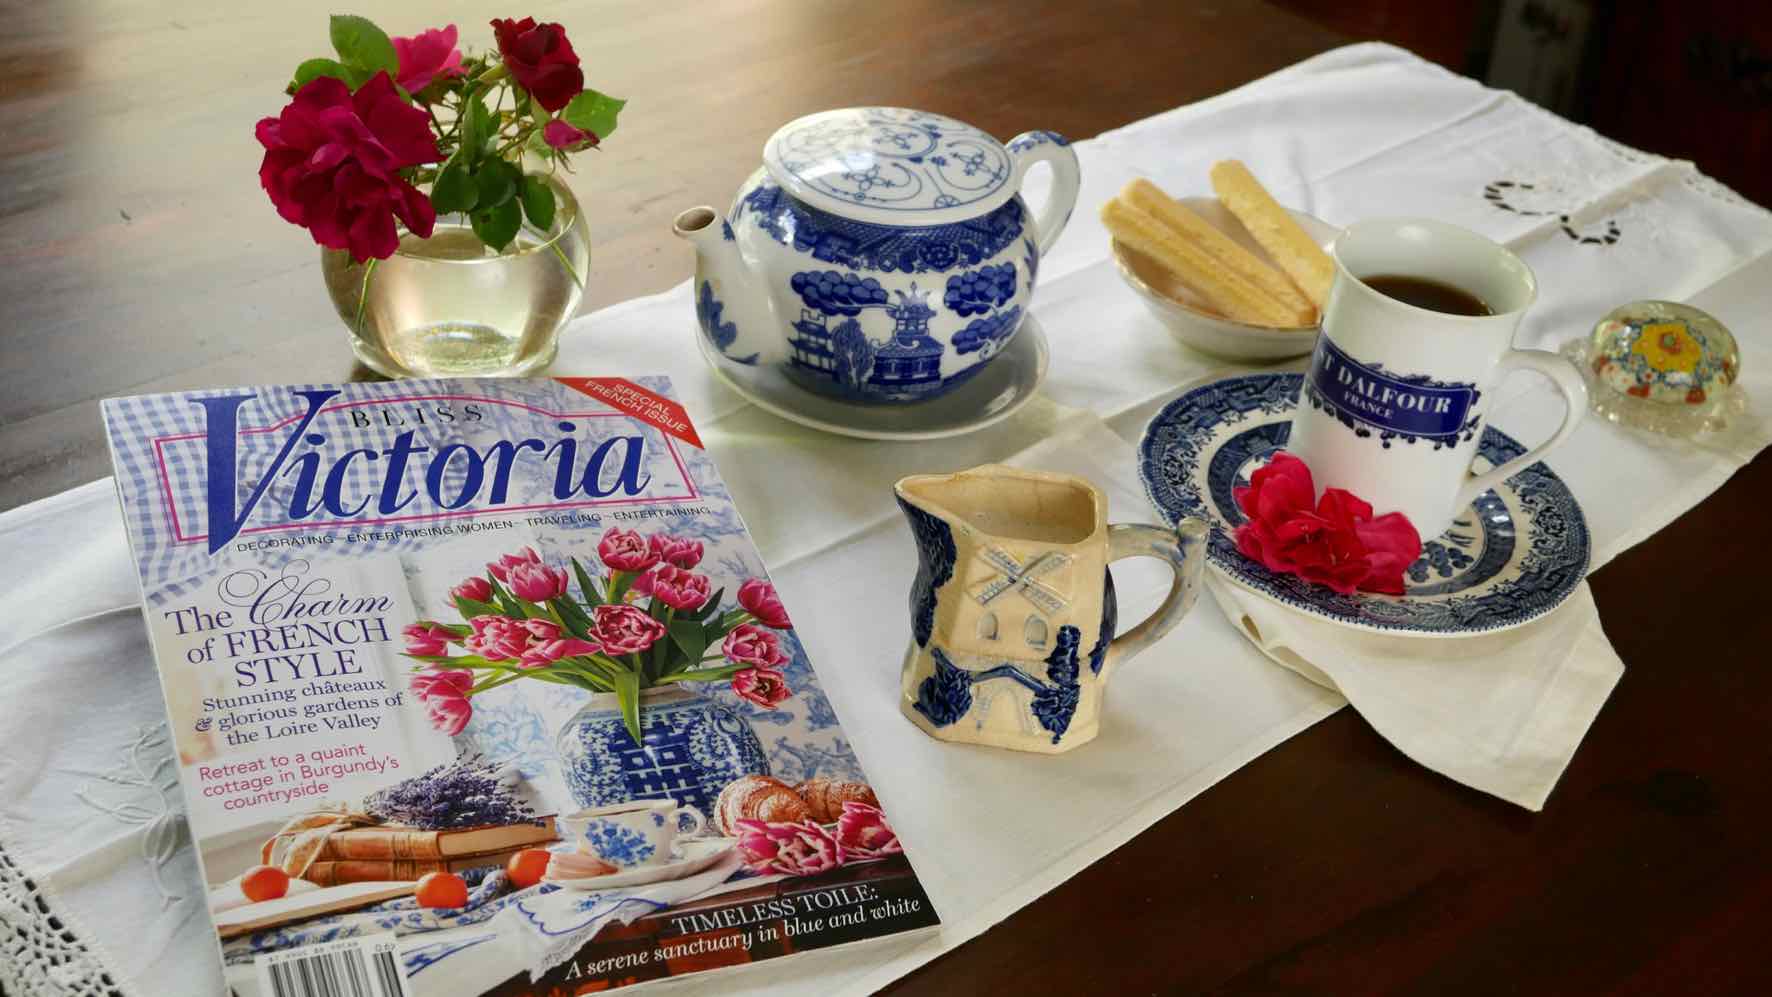 Victoria Magazine Special Issue 2020 with blue and white tea assessories and vase of red roses